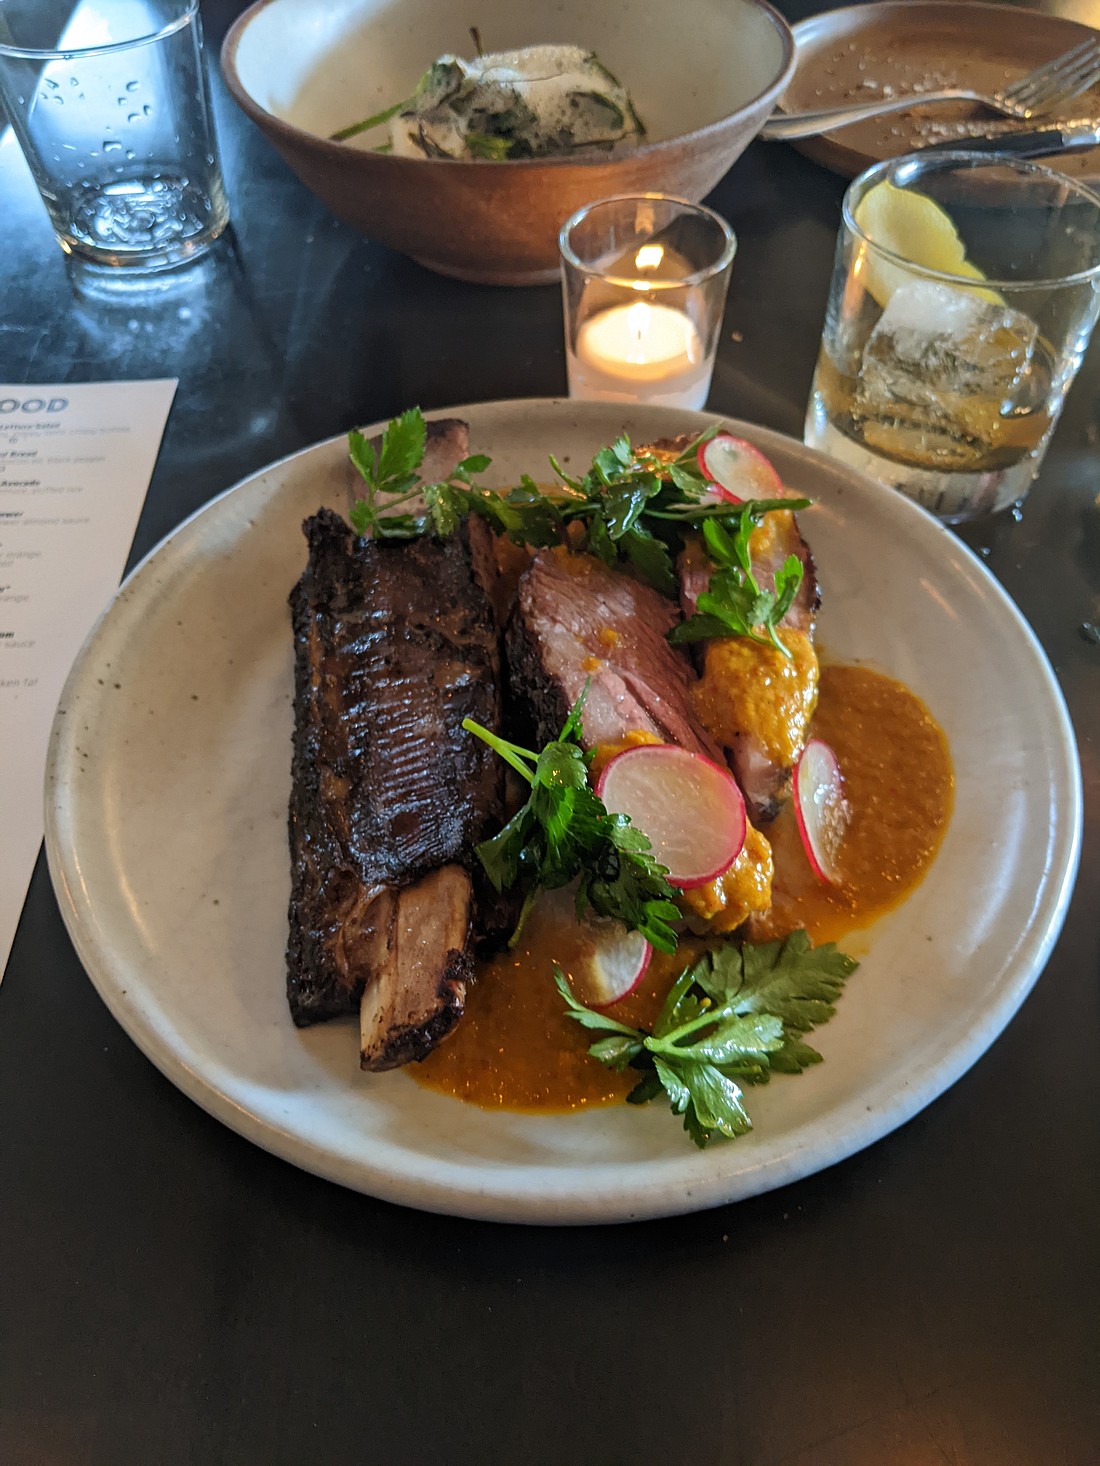 Carnal's slow-cooked, bone-in, beef short rib arrives with the bulk of the meat already sliced away from the bone. Fire roasted and drizzled in a turmeric and mango puree, it takes a lot of willpower to not grab it and gnaw on it like a caveman squatting over a campfire.